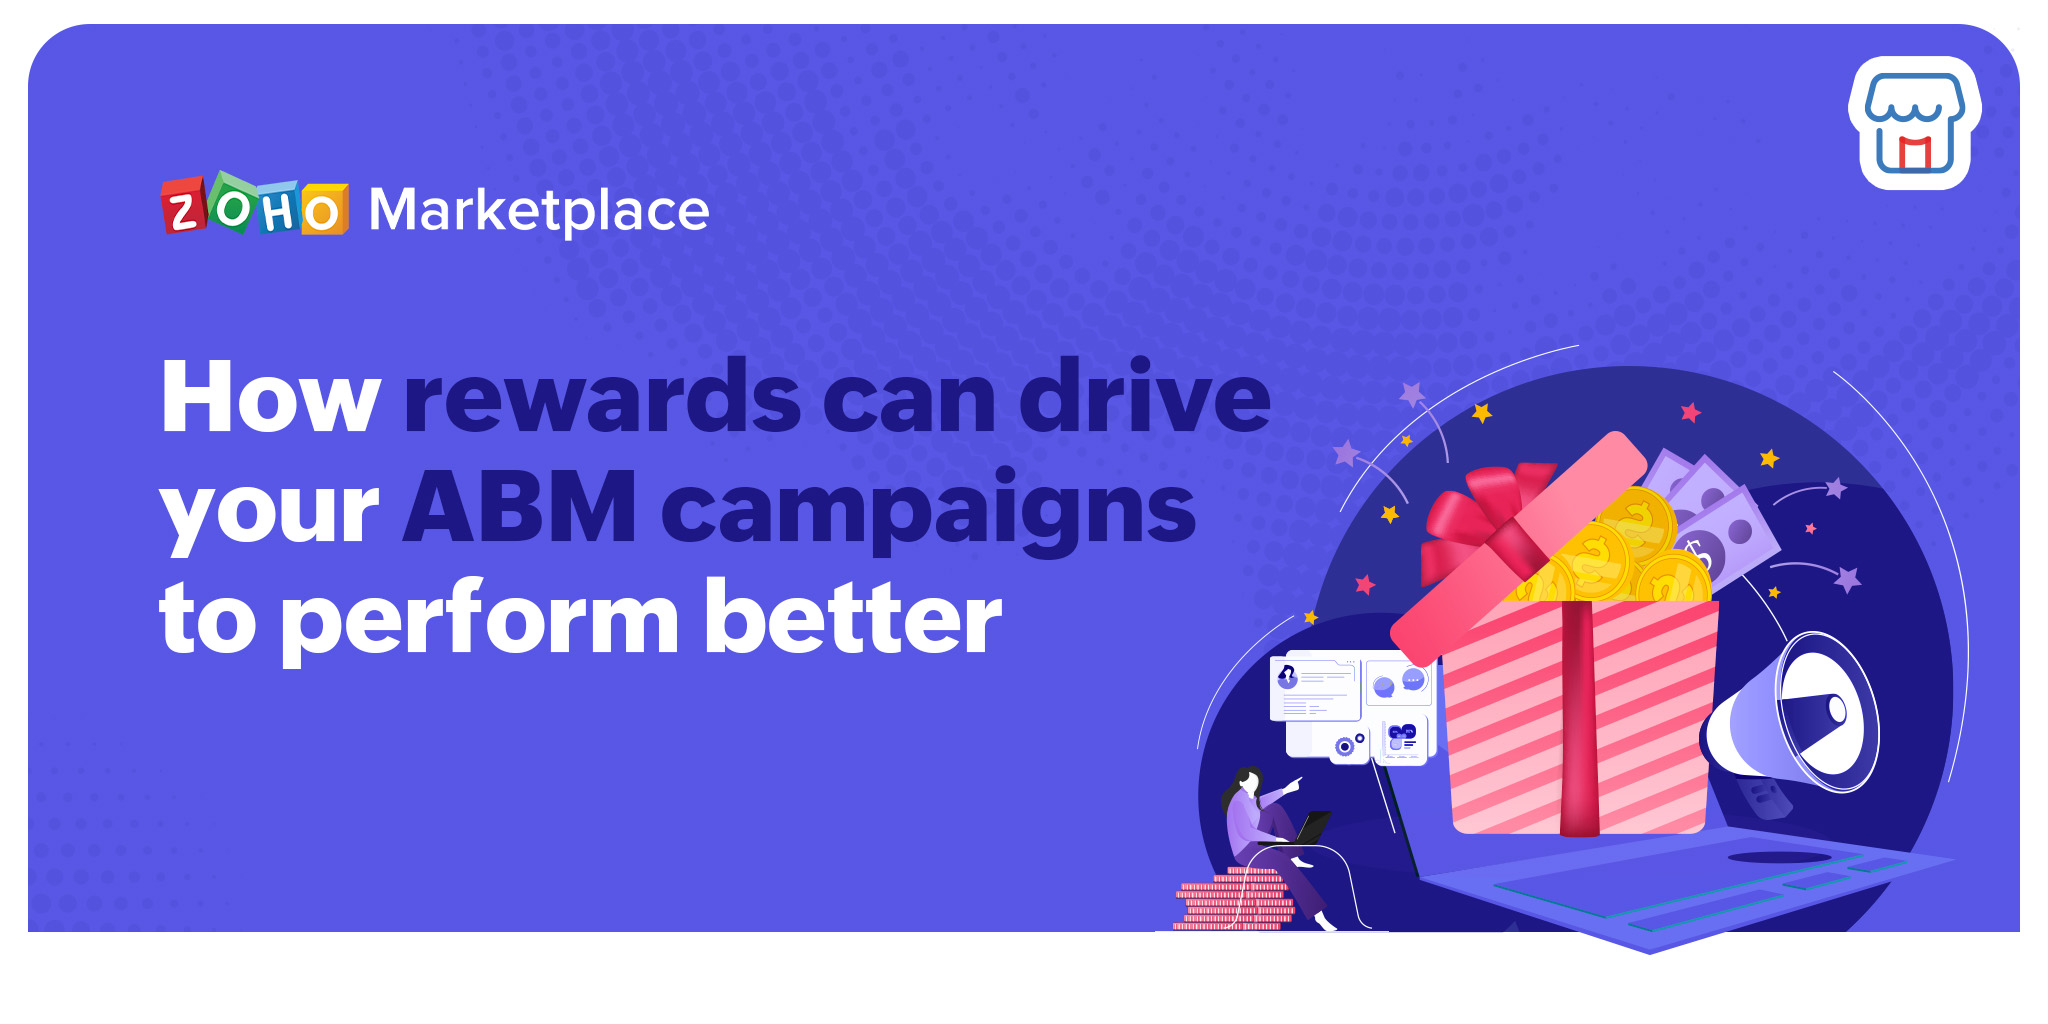 How rewards can drive your ABM campaigns to perform better